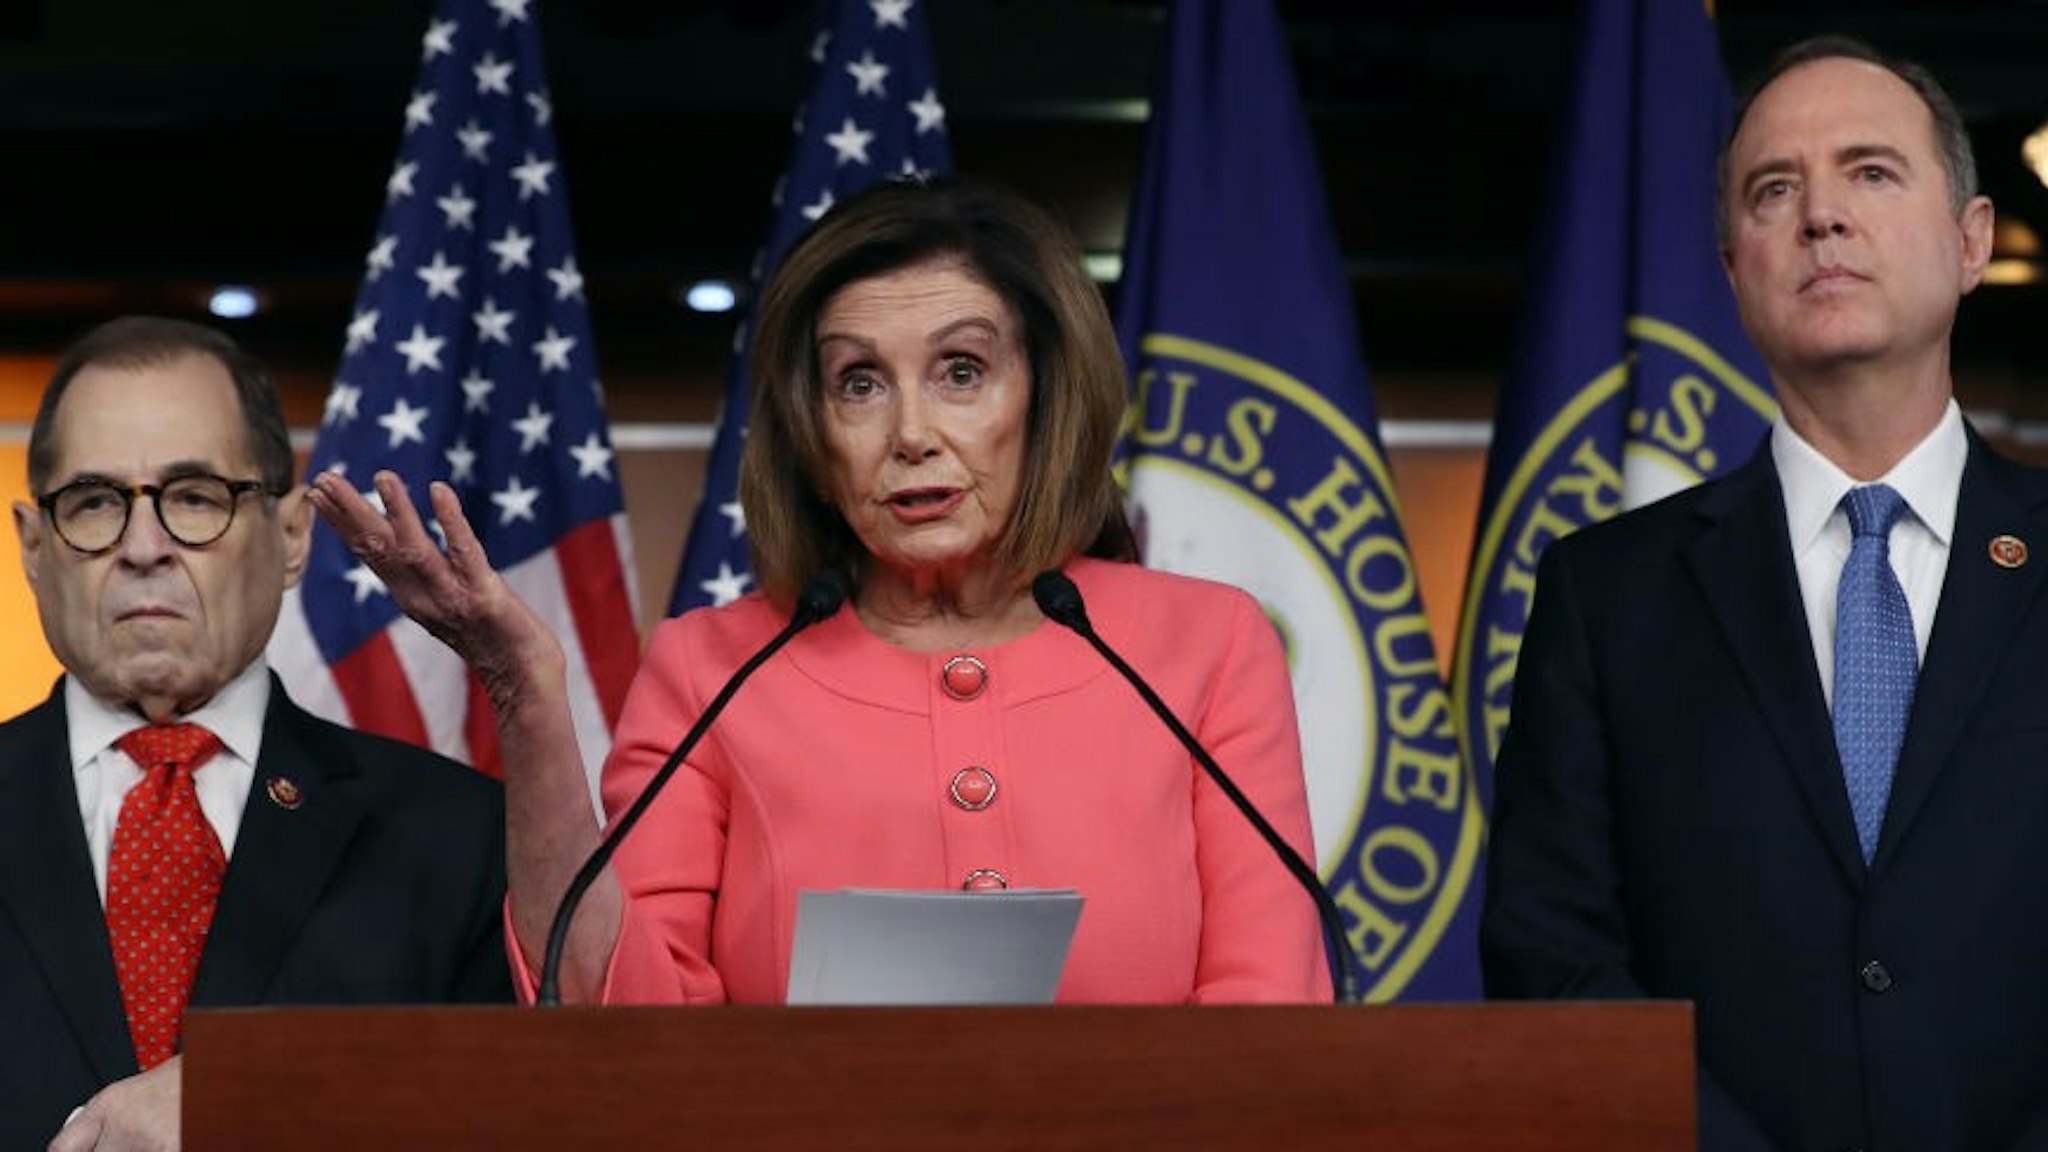 WASHINGTON, DC - JANUARY 15: U.S. Speaker of the House Nancy Pelosi (D-CA) (C) announces that Rep. Jerrold Nadler (D-NY) (L) and Rep. Adam Schiff (D-CA) will lead the seven managers of the Senate impeachment trial of President Donald Trump at the U.S. Capitol January 15, 2020 in Washington, DC. The House of Representatives is scheduled to vote to send the articles of impeachment to the Senate later in the day and Senate Majority Leader Mitch McConnell (R-KY) said the trial will begin next Tuesday. (Photo by